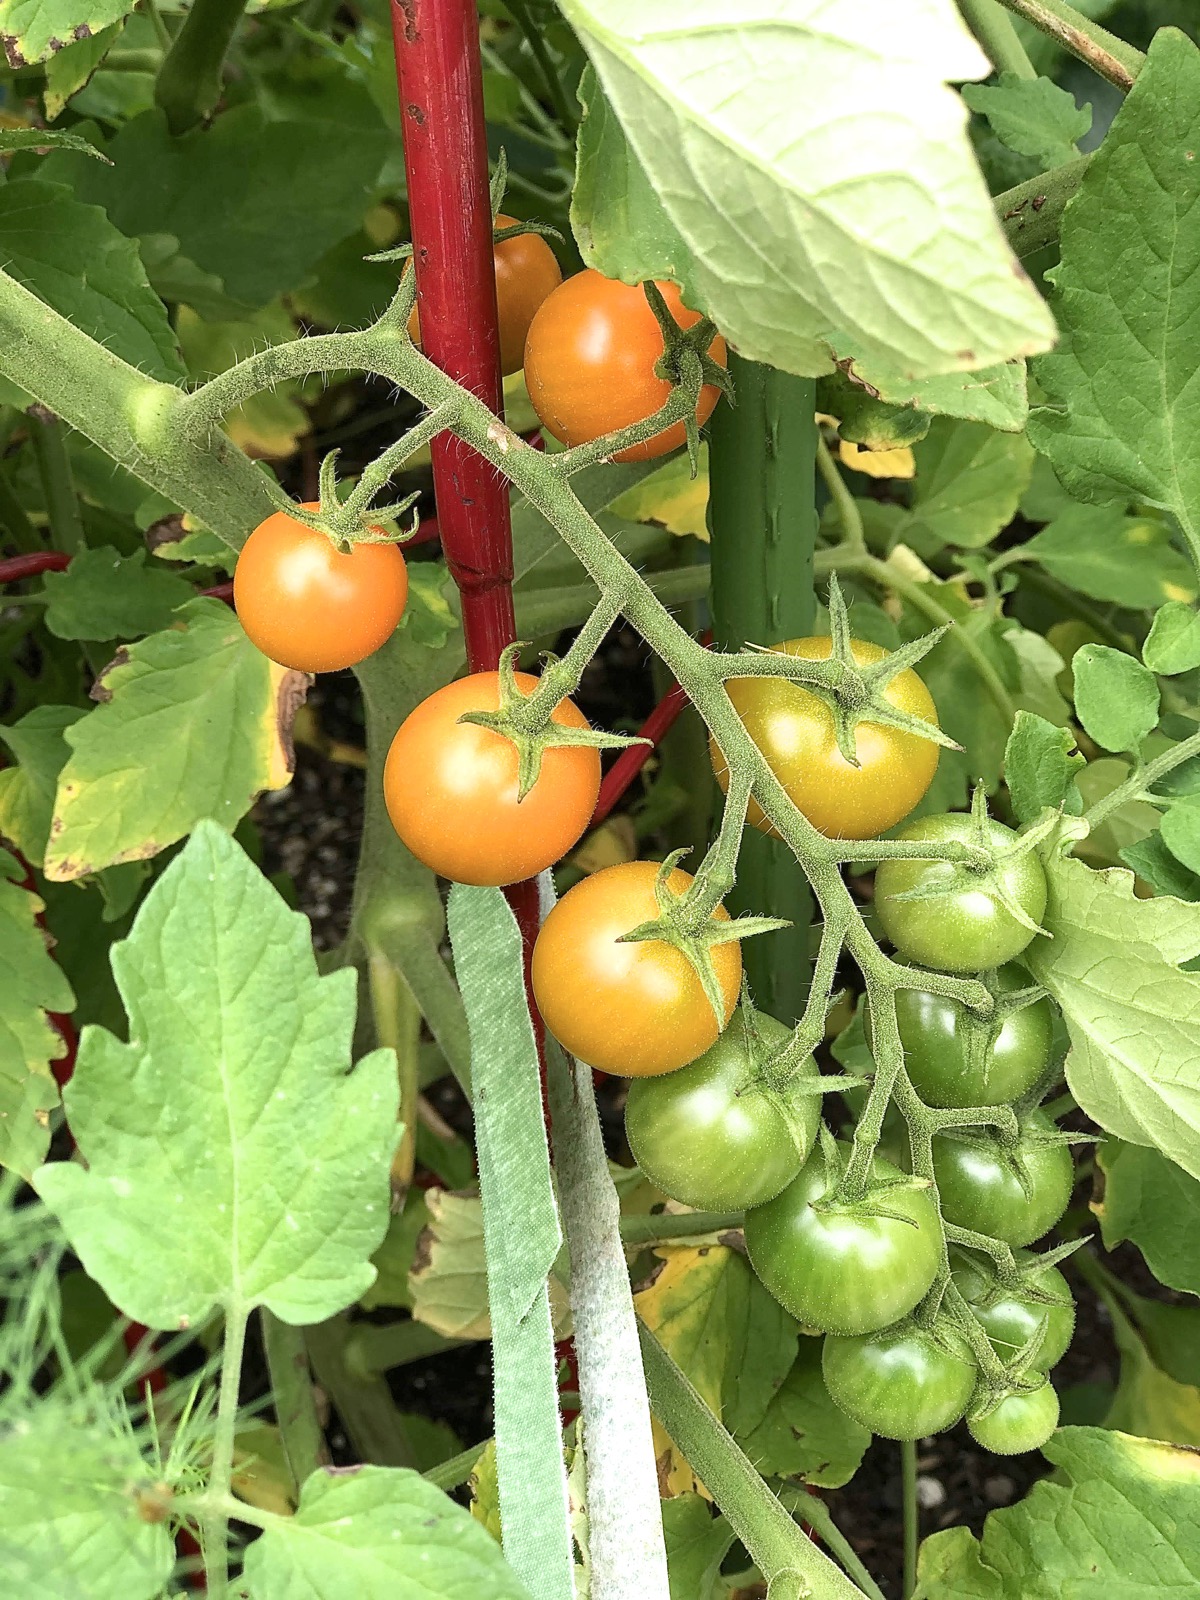 Cherry tomatoes ripening on the vine.